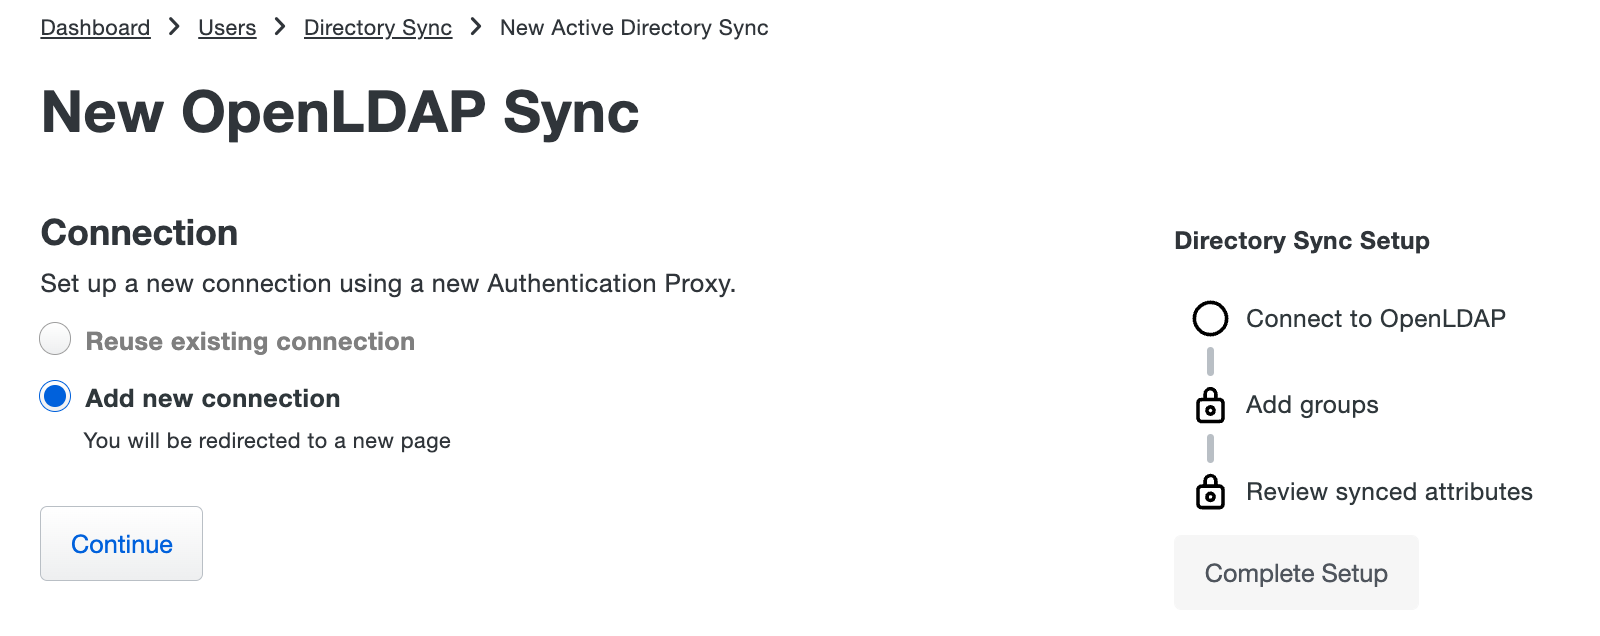 New OpenLDAP Sync Connection